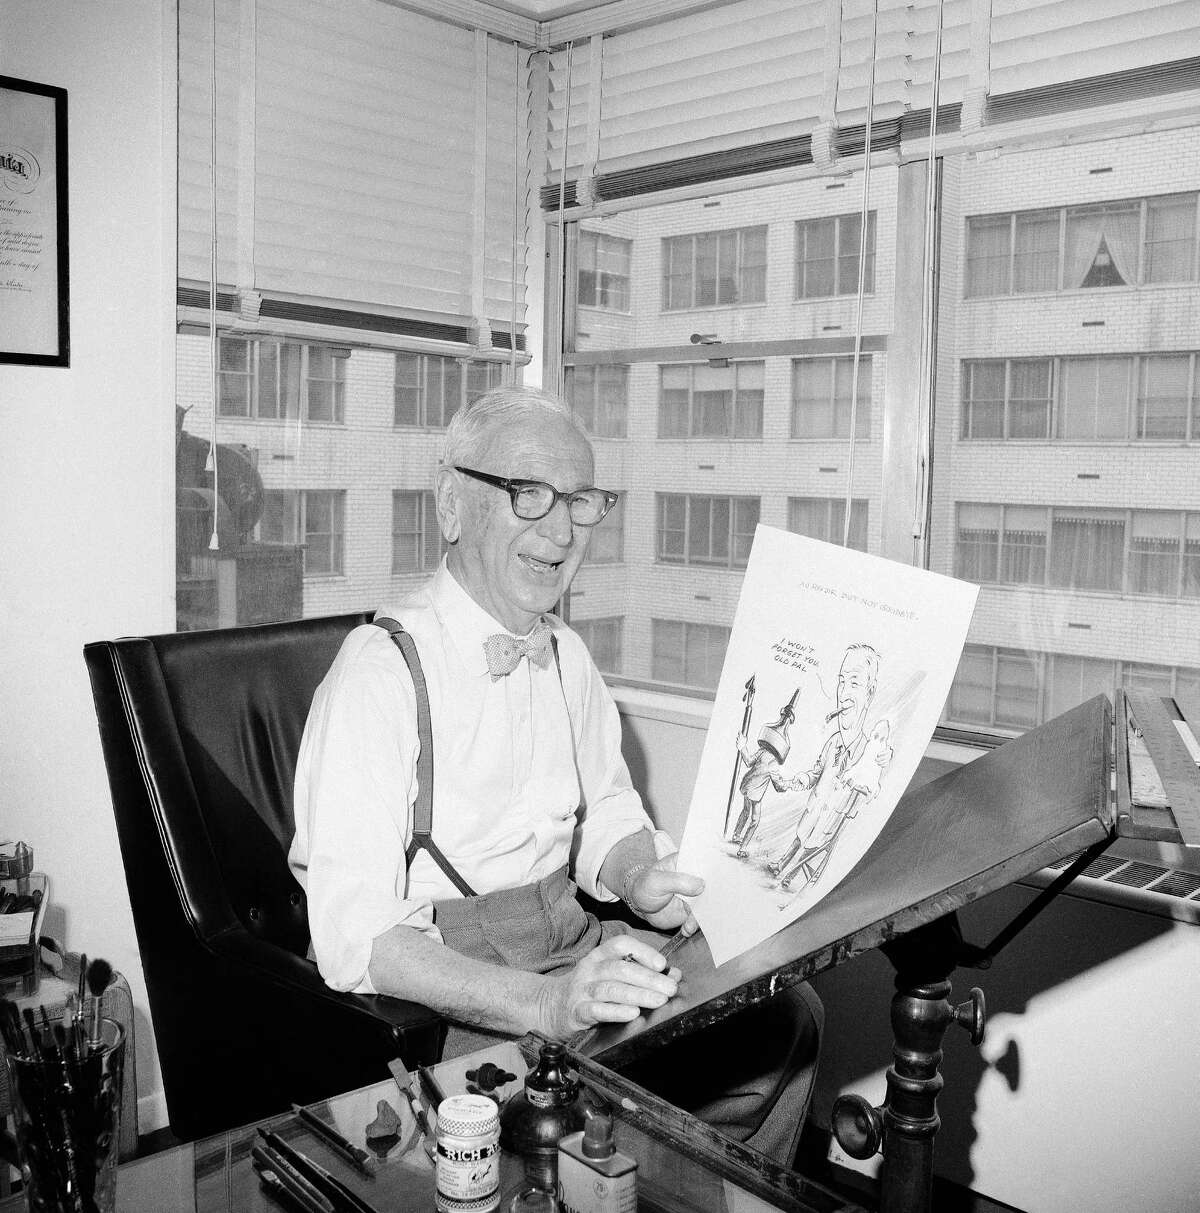 Cartoonist Rube Goldberg, 81, is shown in his New York City apartment, April 24, 1964 after he completed his last cartoon, which showed him bidding goodbye to a cartoonist’s pen and ink bottle. He draws the cartoon to mark his resignation as a King Features cartoonist, and said at the time he planned to devote the rest of his life to sculpture. (AP Photo/John Lindsay)